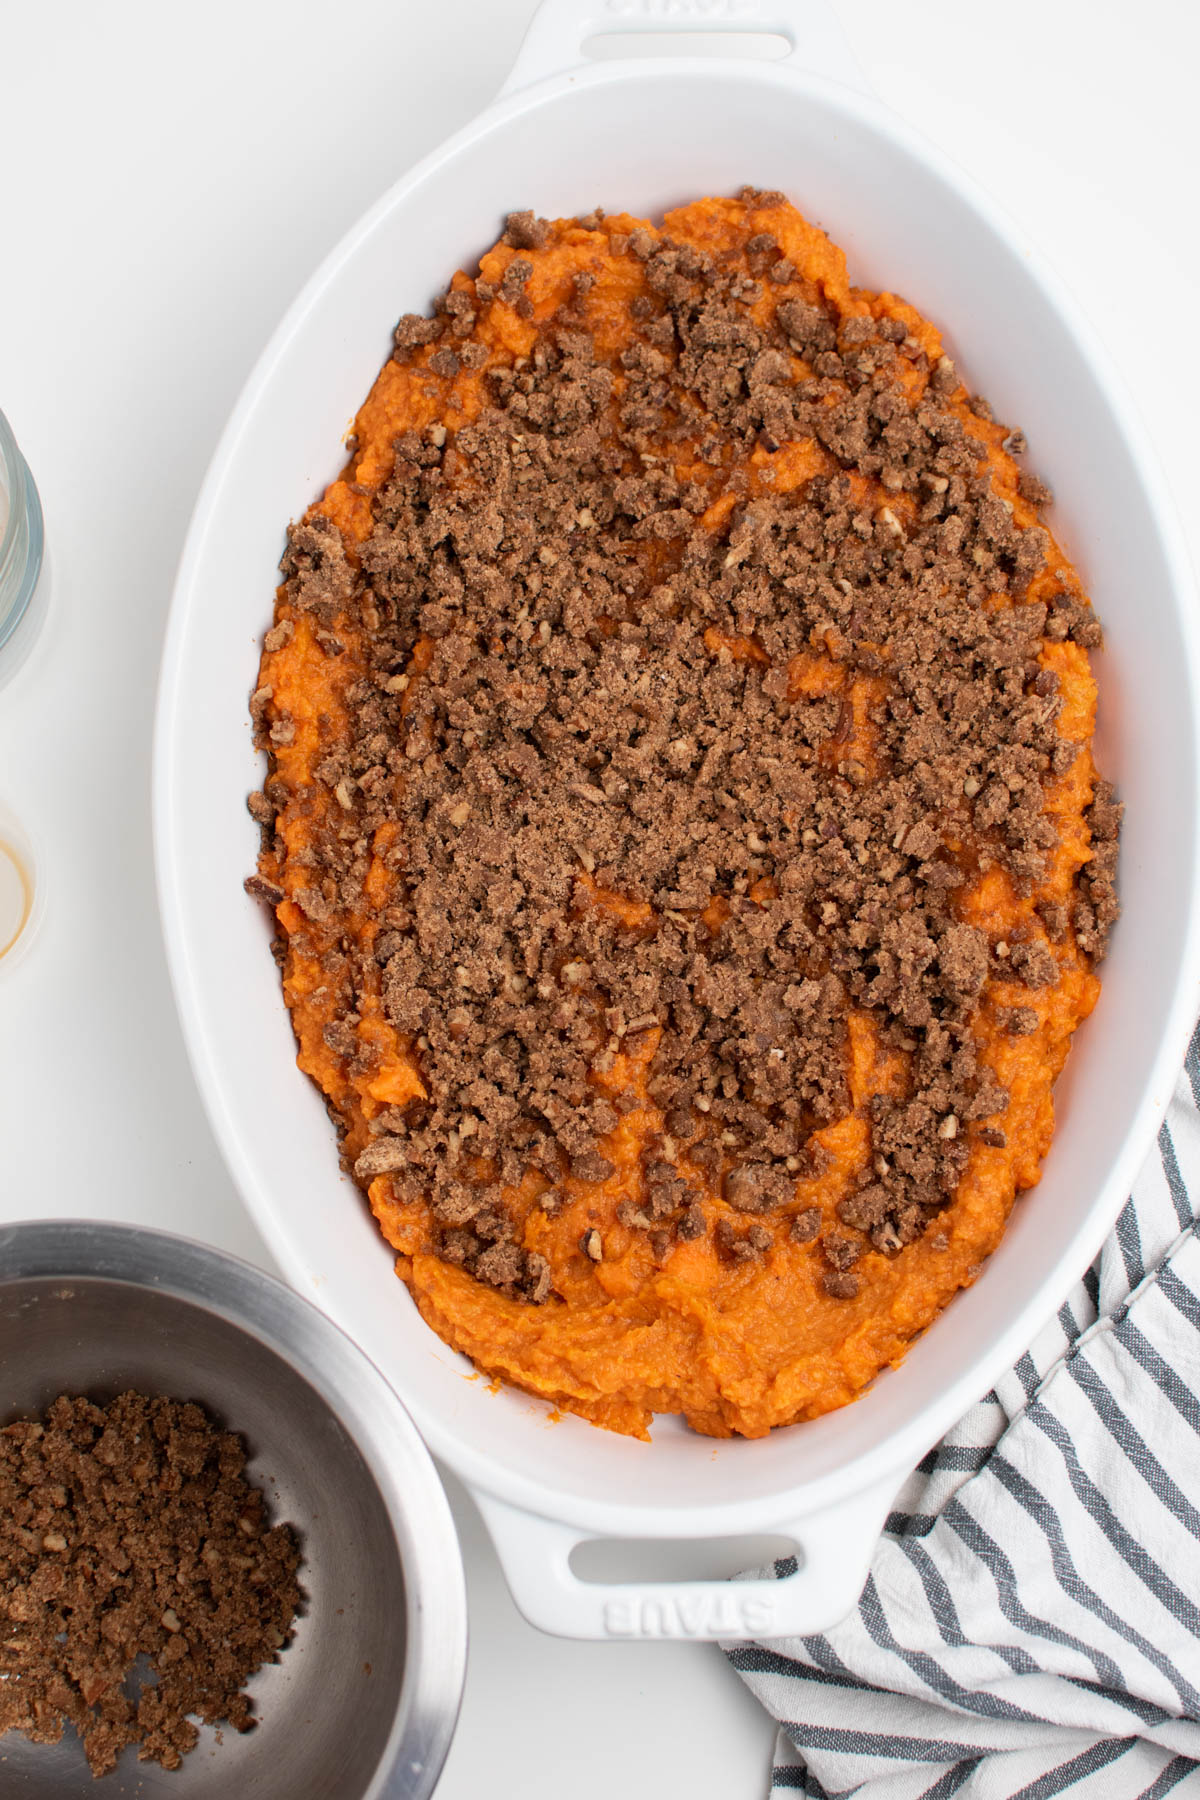 Mashed sweet potatoes in white baking dish with brown sugar topping sprinkled over.